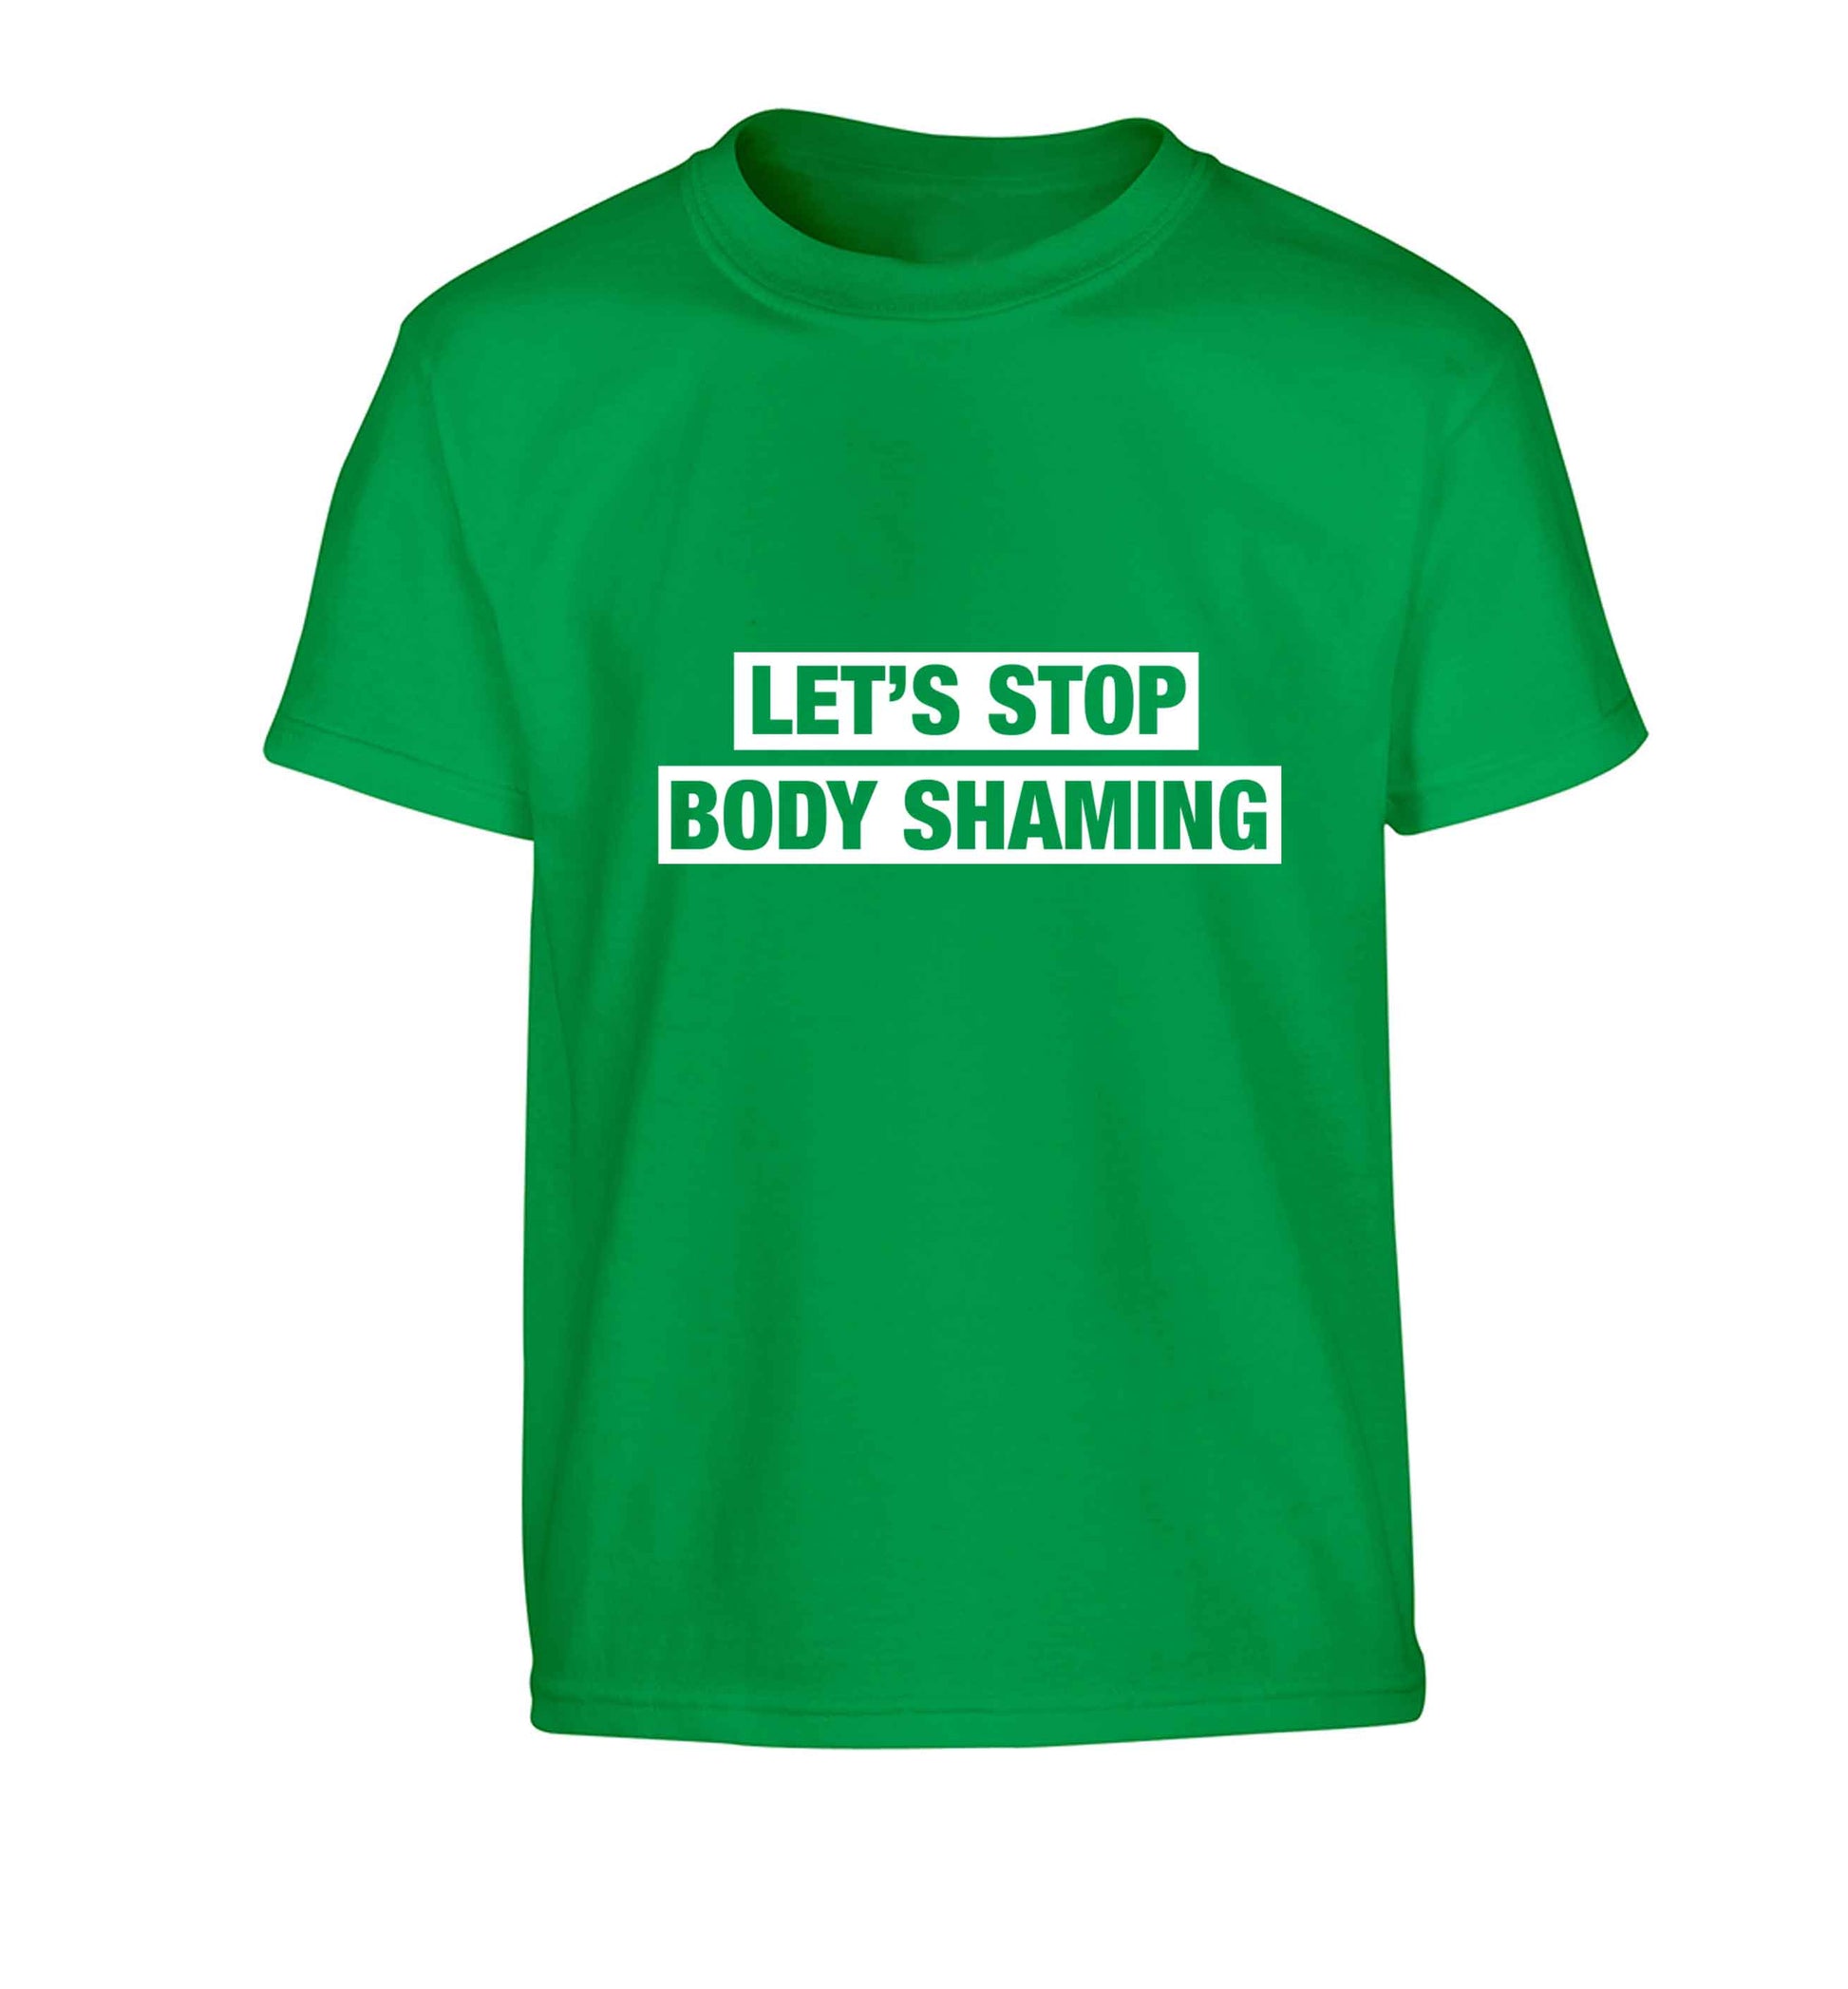 Let's stop body shaming Children's green Tshirt 12-13 Years